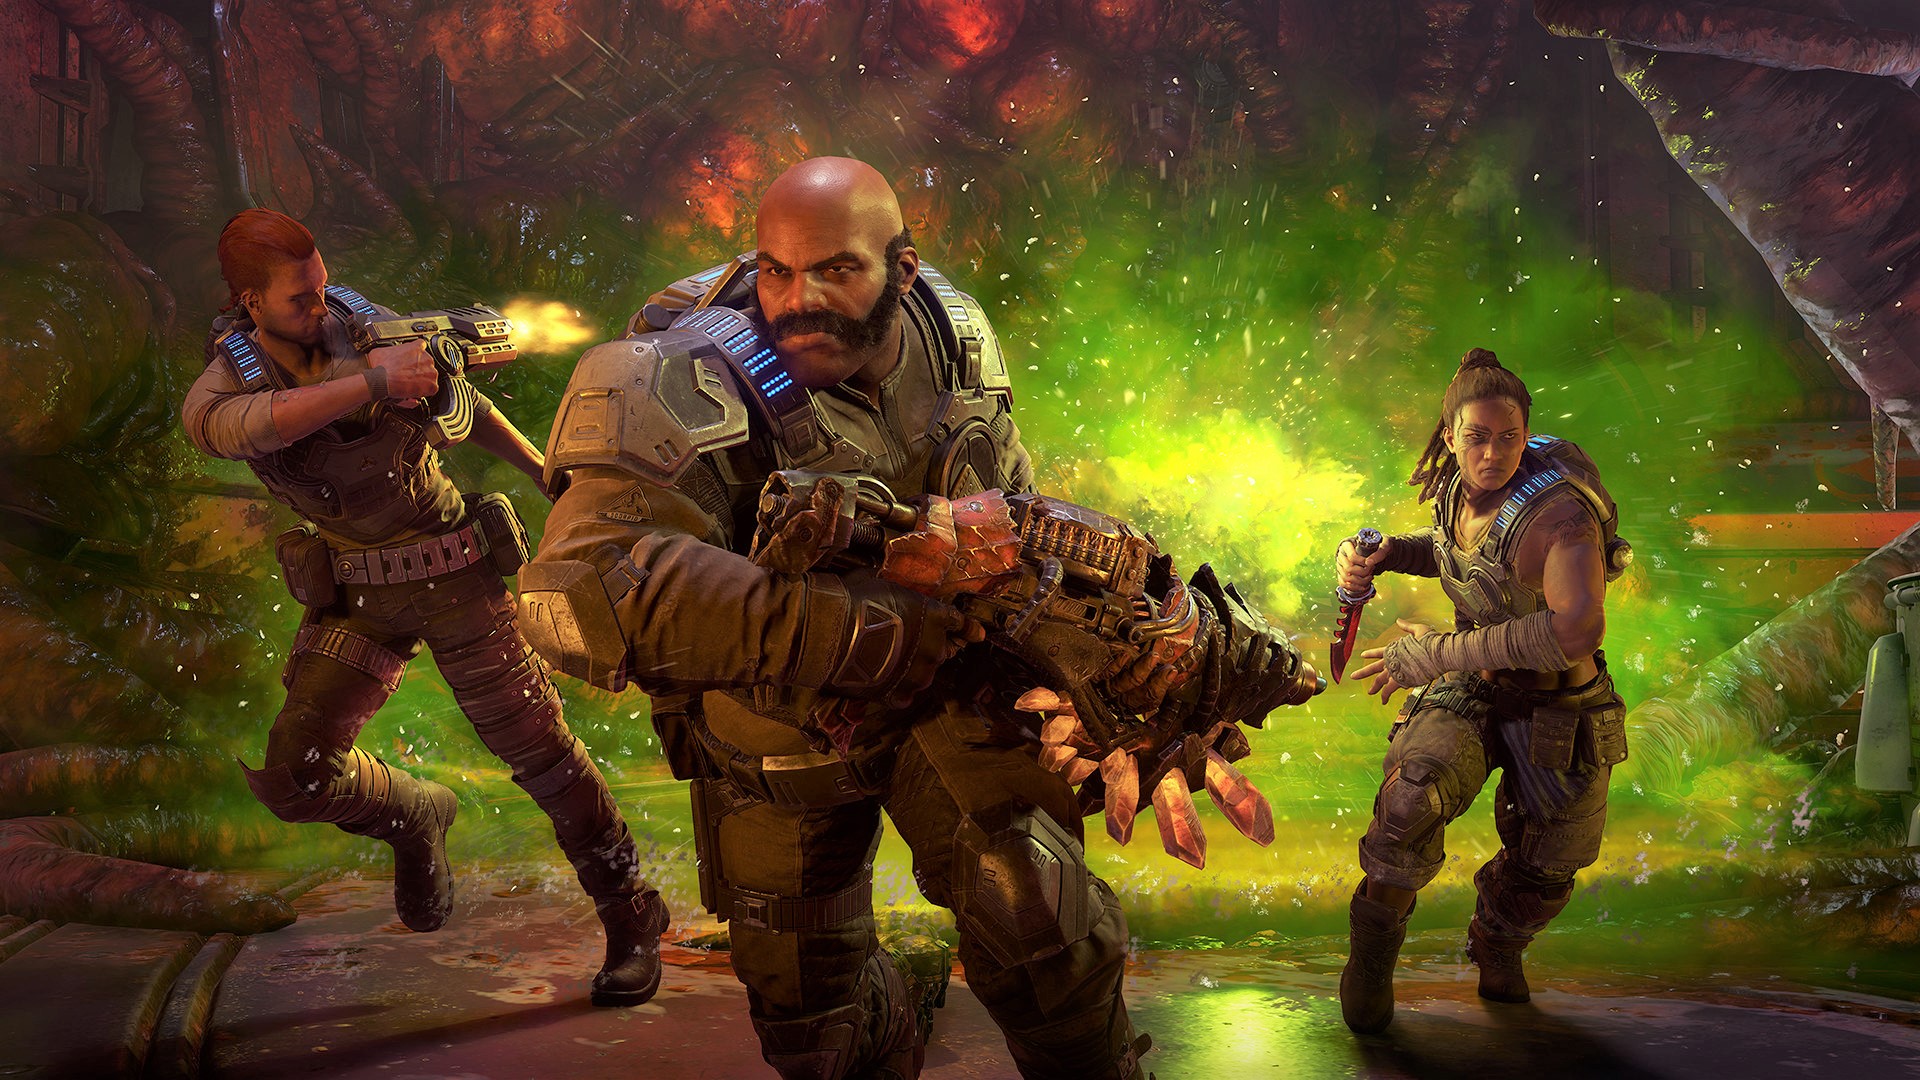 Gears 5 dethroned Fortnite on Xbox – but Steam player counts aren't great